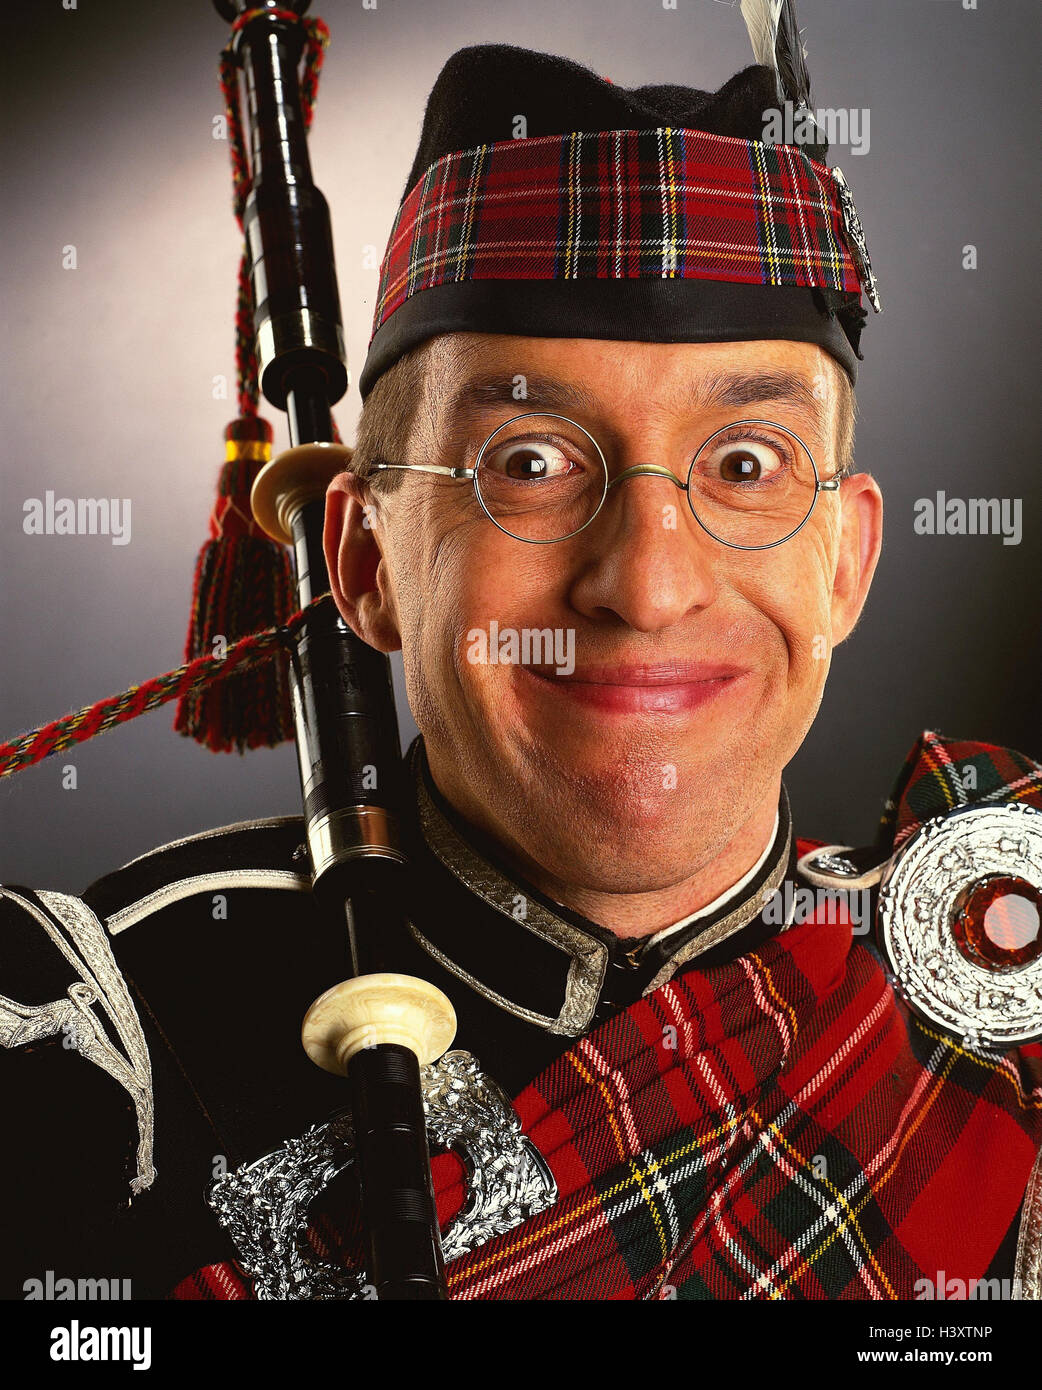 Scot, glasses, to bagpipes, facial play, portrait, concepts, Scotland, man, musical instrument, clothes, headgear, tradition, checked, smile, grin, grimace, happy, is surprised, studio, Stock Photo